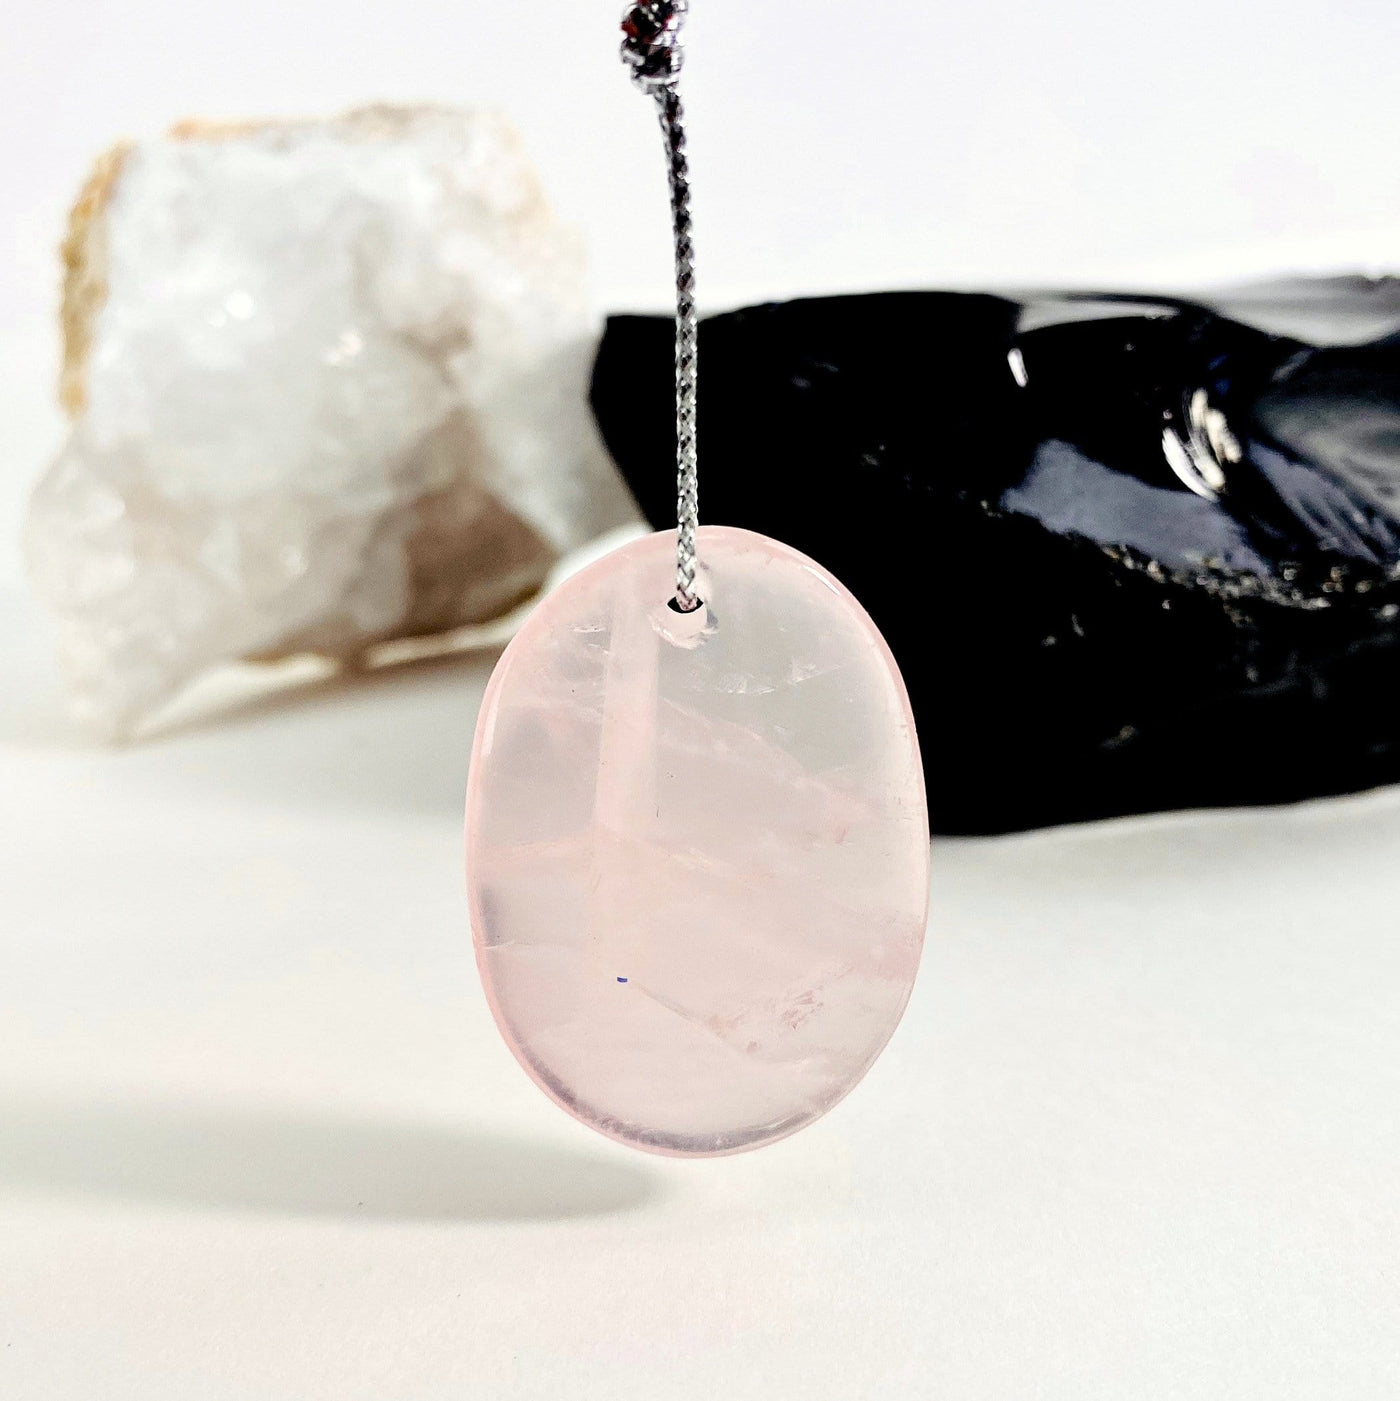 Rose Quartz Tumbled Pendant with other crystals blurred in the background